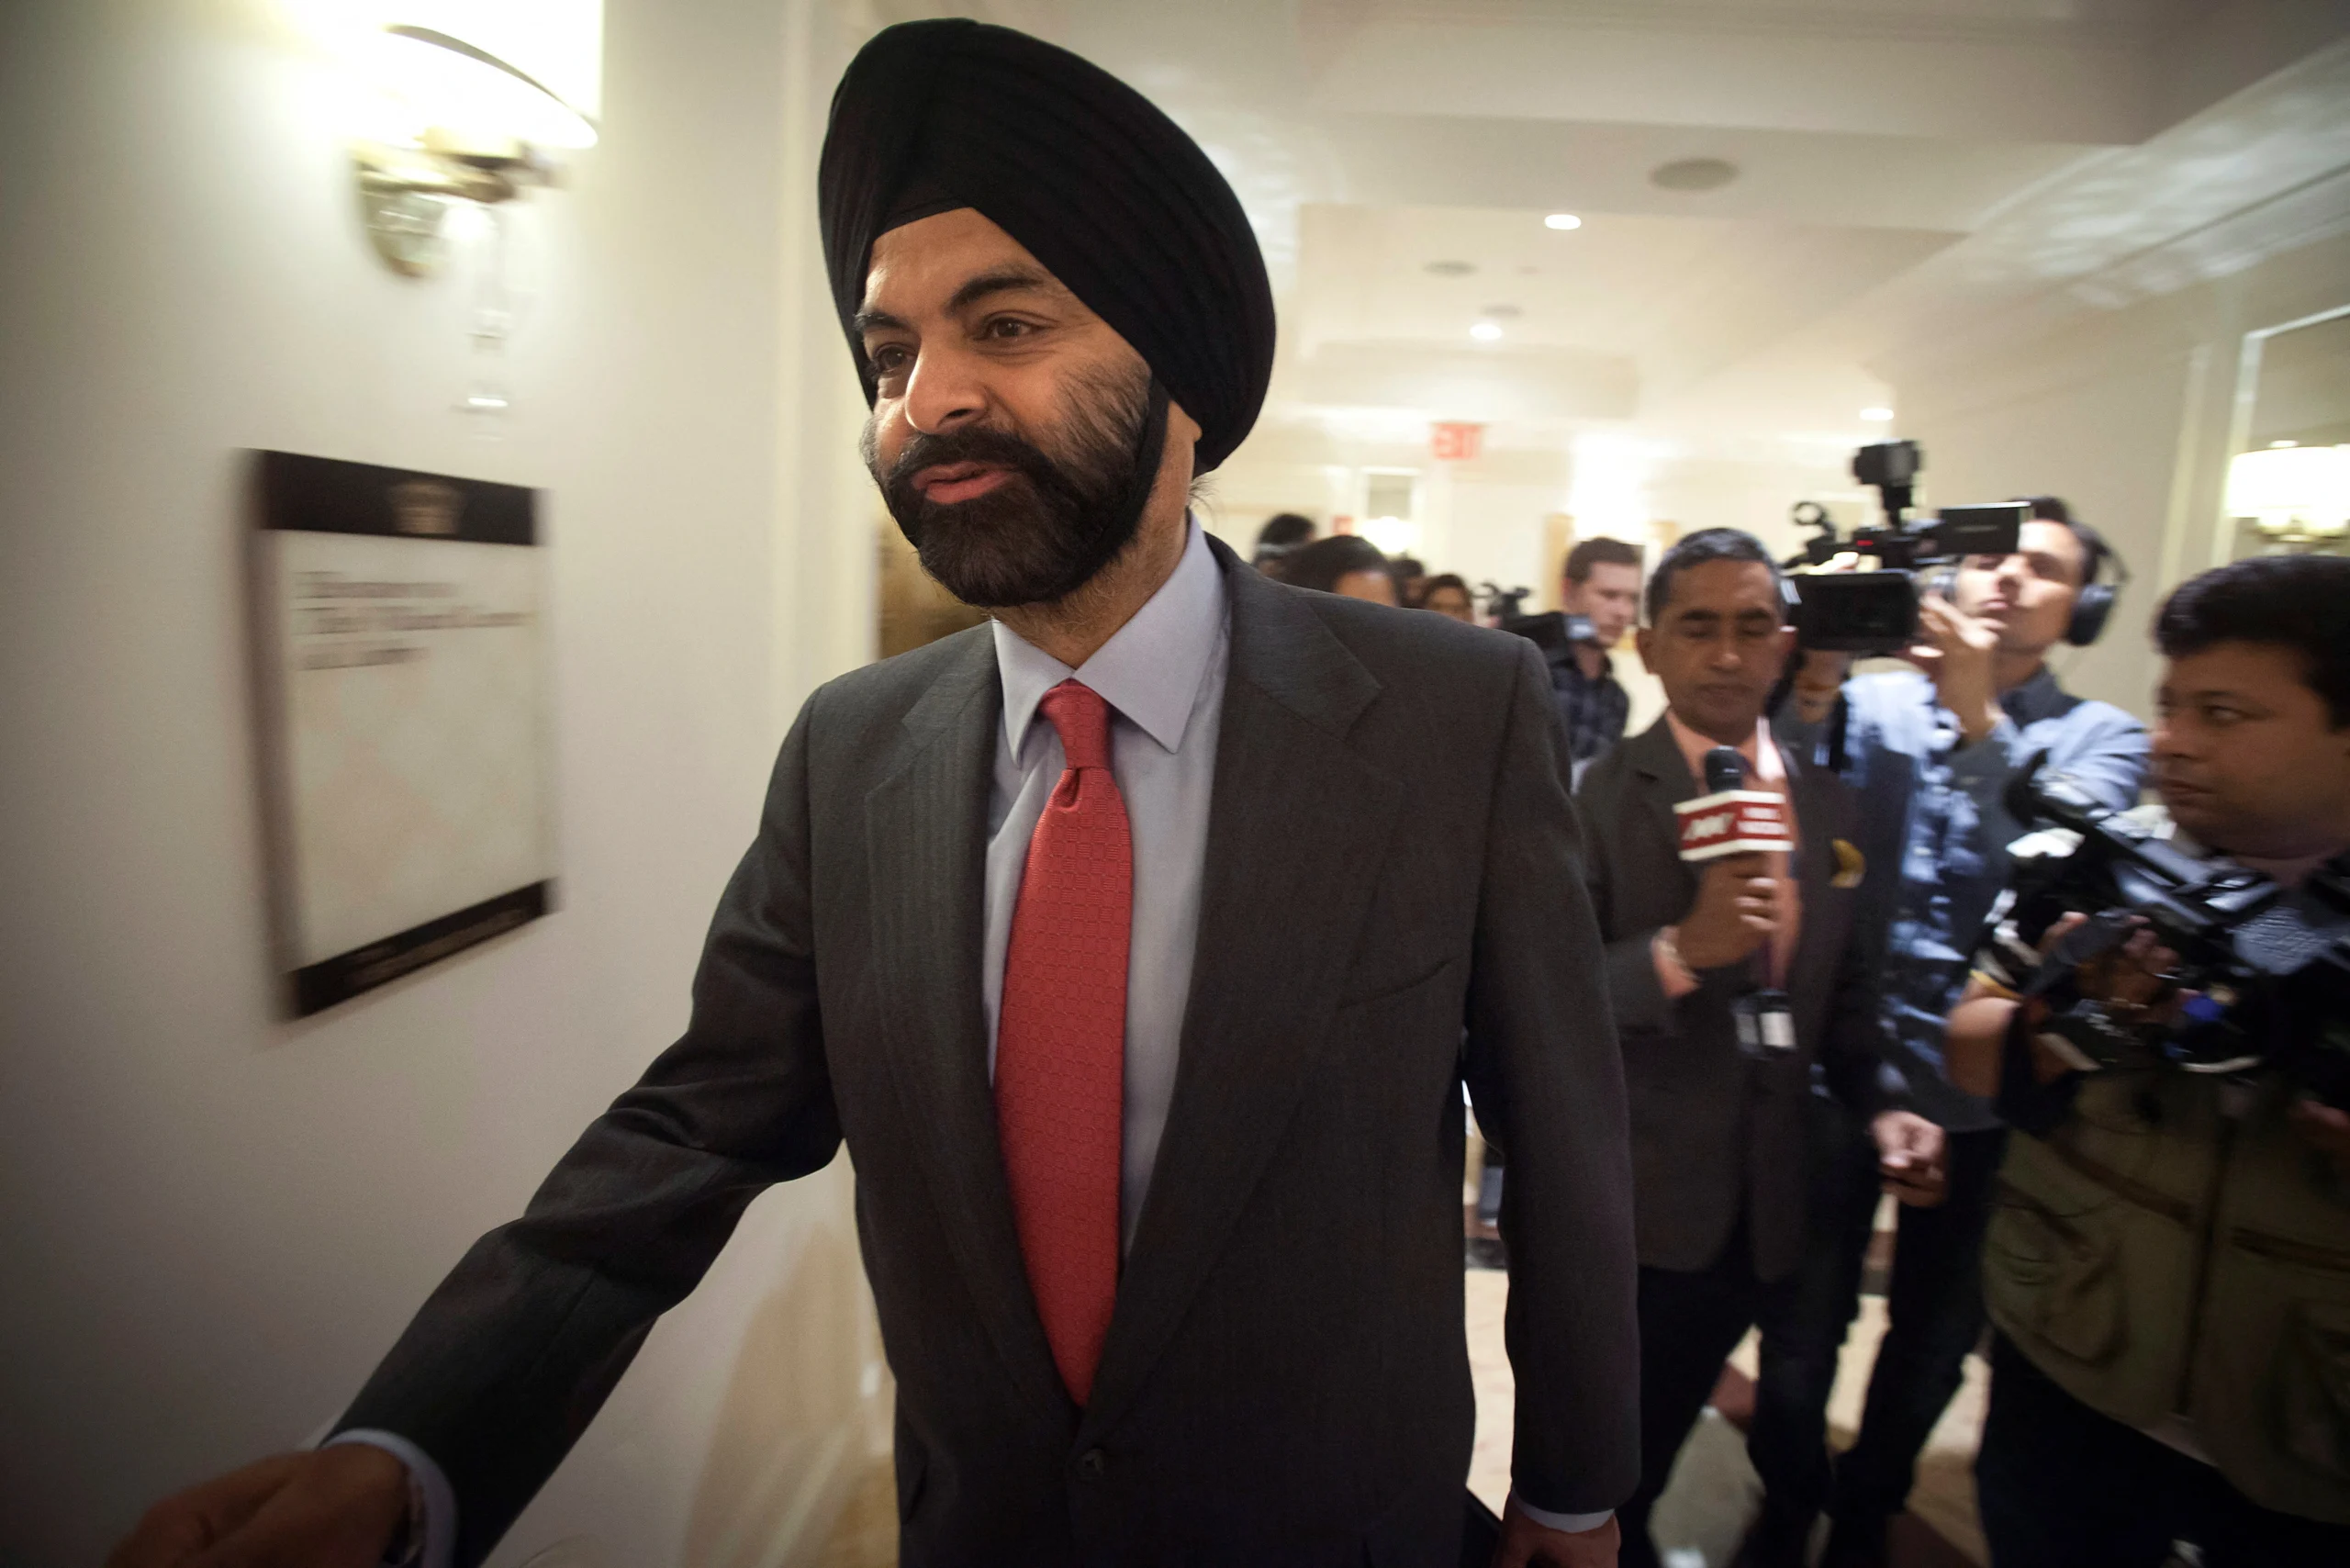 US nominee for World Bank President Ajay Banga heads to India for final stop on global tour